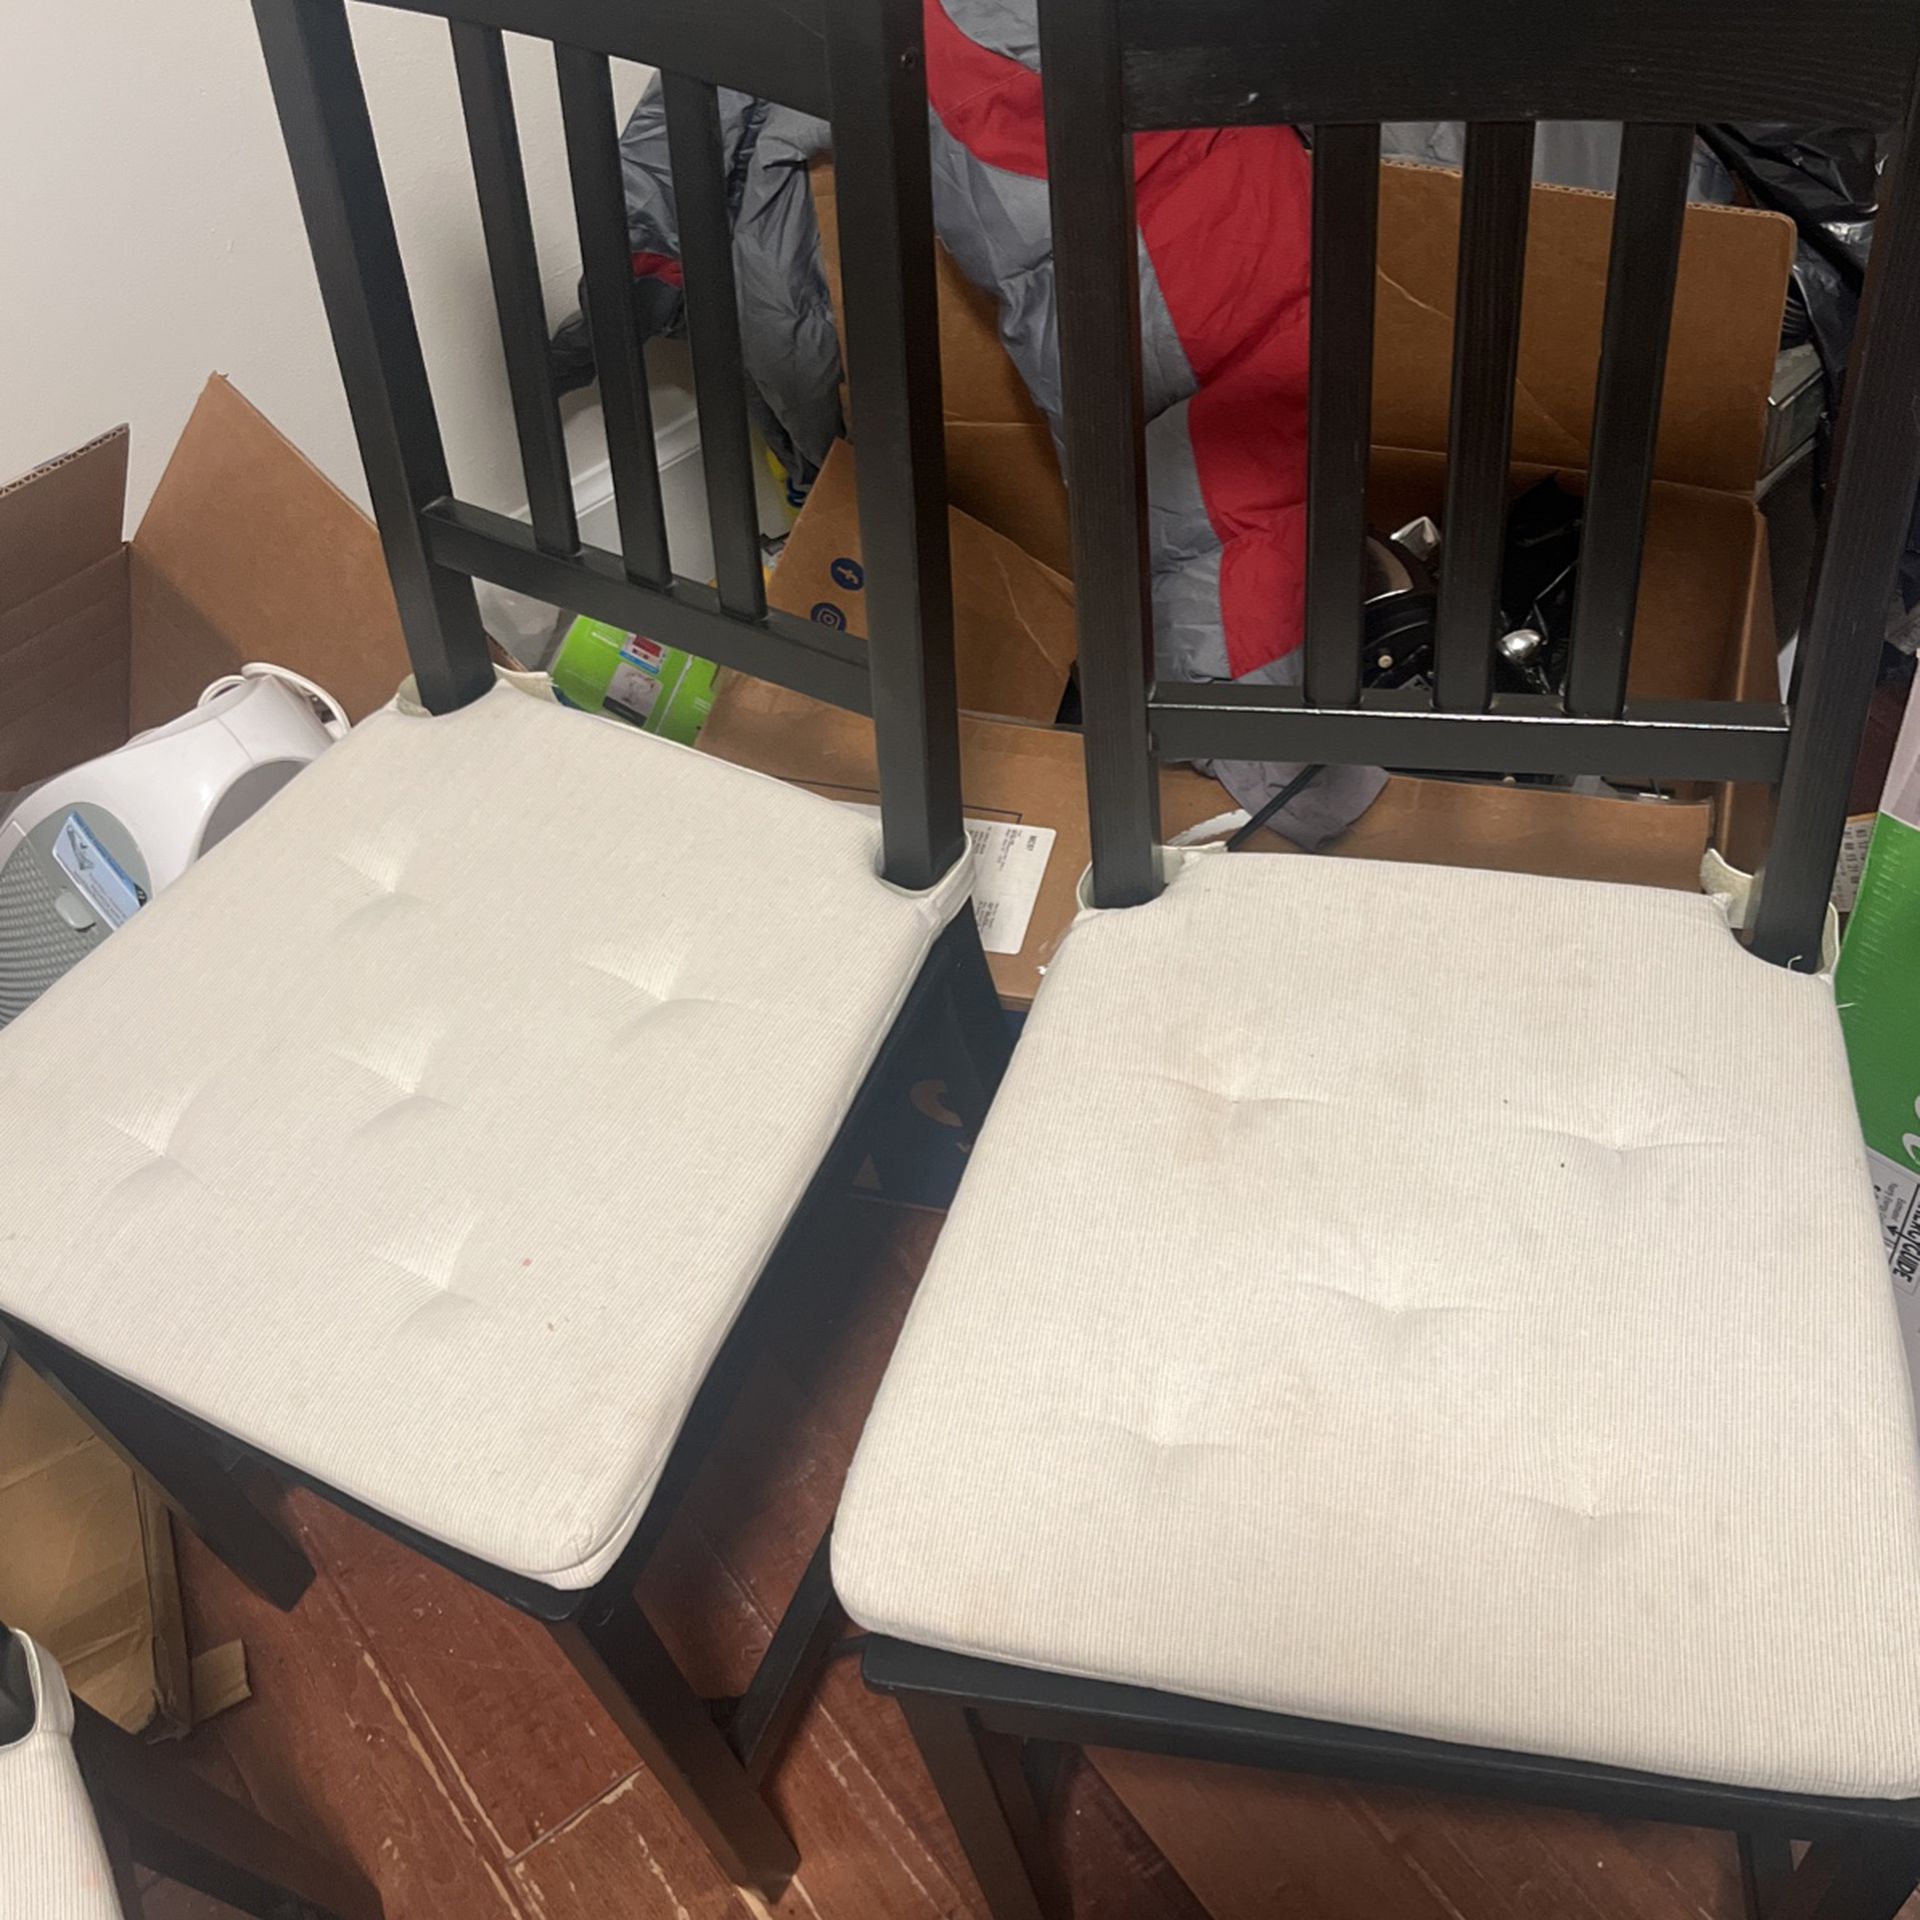 4 IKEA Chairs In Black With Seat Covers 